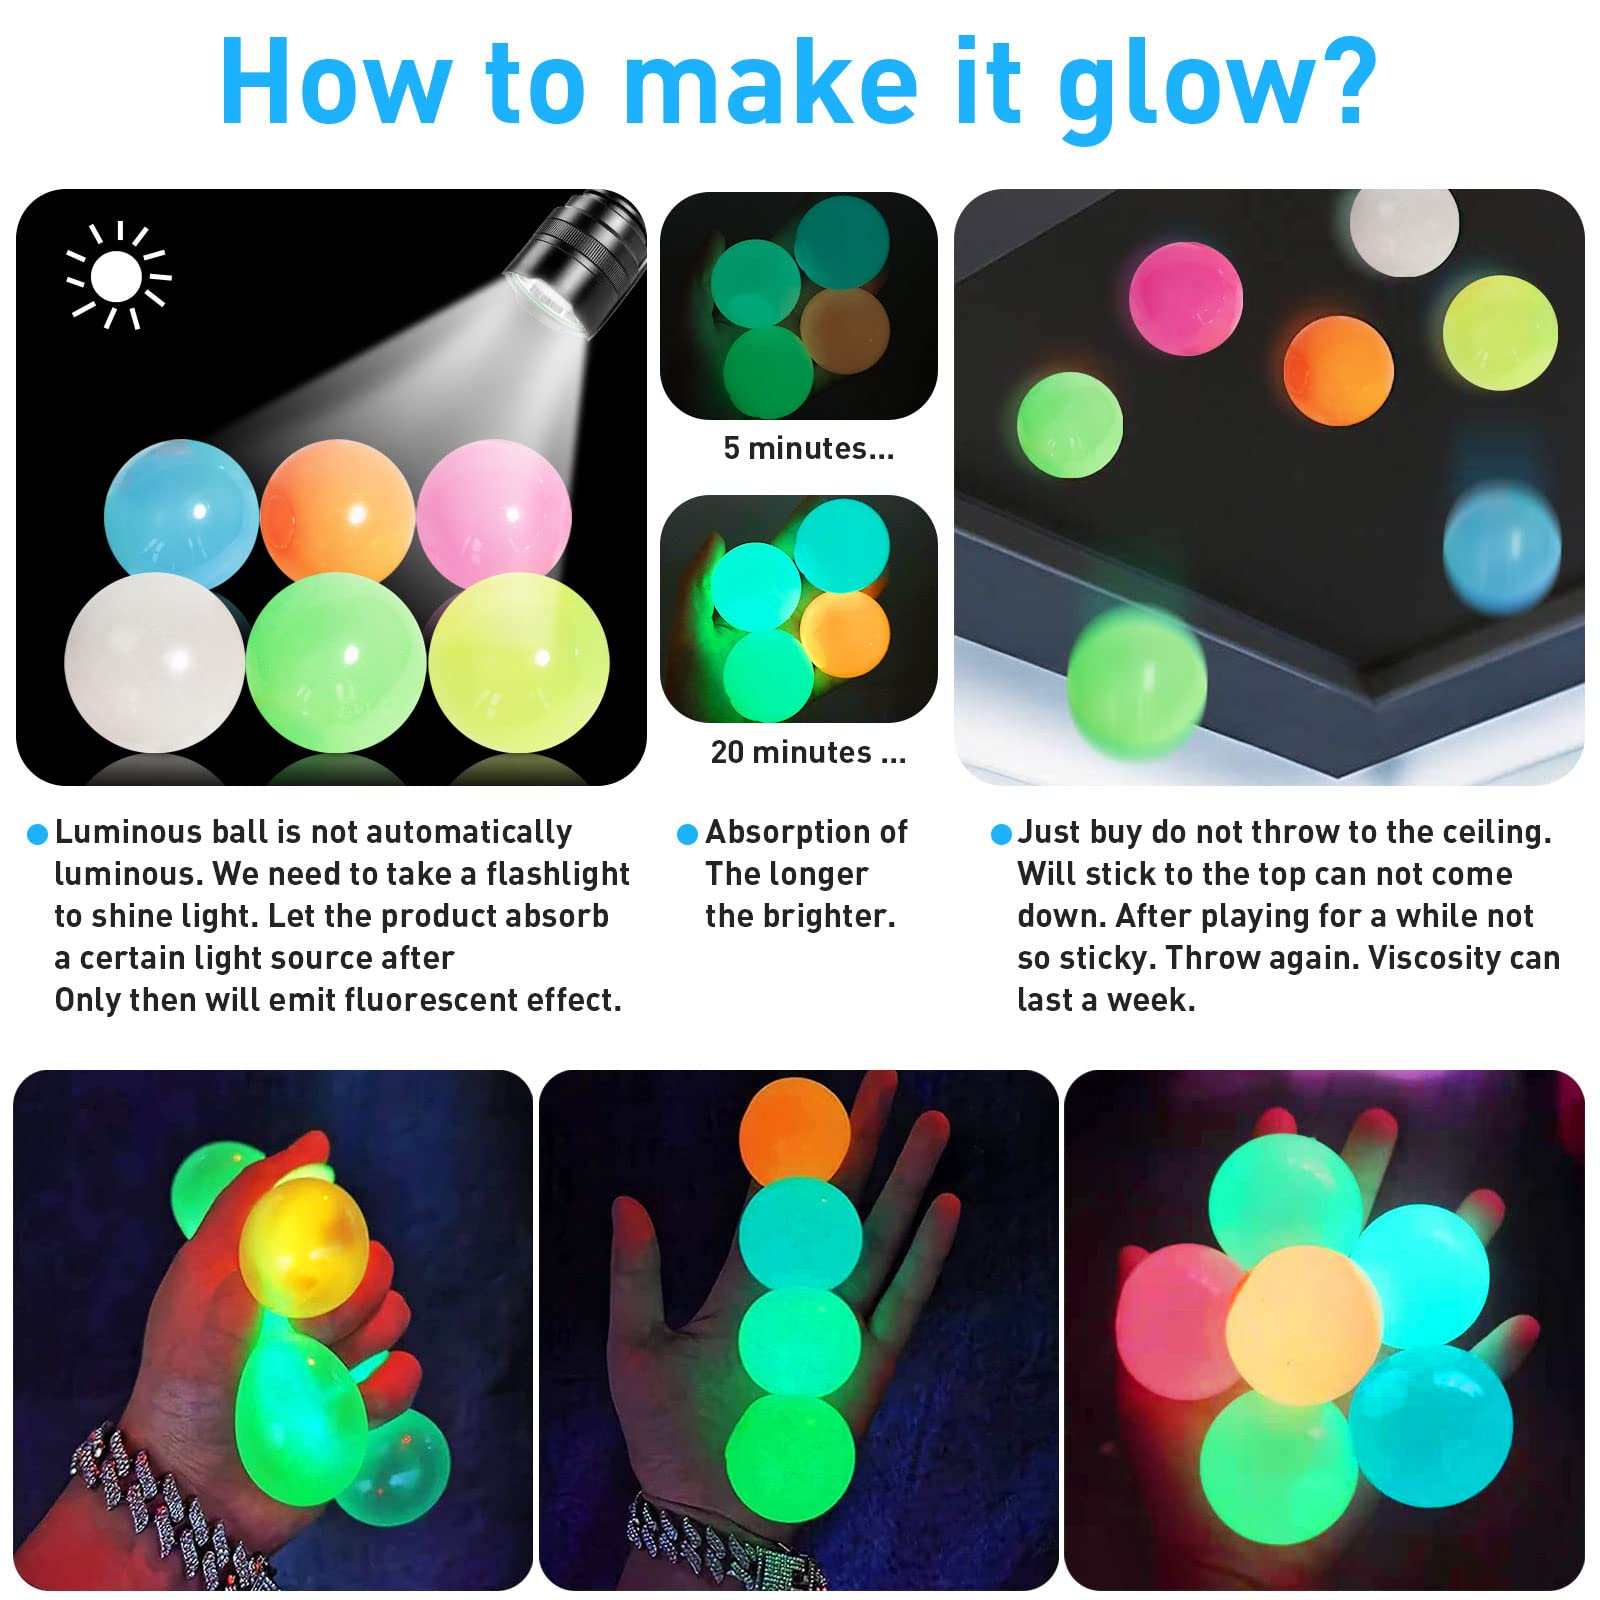 4 Pcs Ceiling Balls Glowing Sticky Balls, Stress Balls Glow in The Dark Toys Stick to The Ceiling, Luminous Stress Relieving Balls Fun Decompression Fidget Toy for Kids and Adults Anxiety Pressure